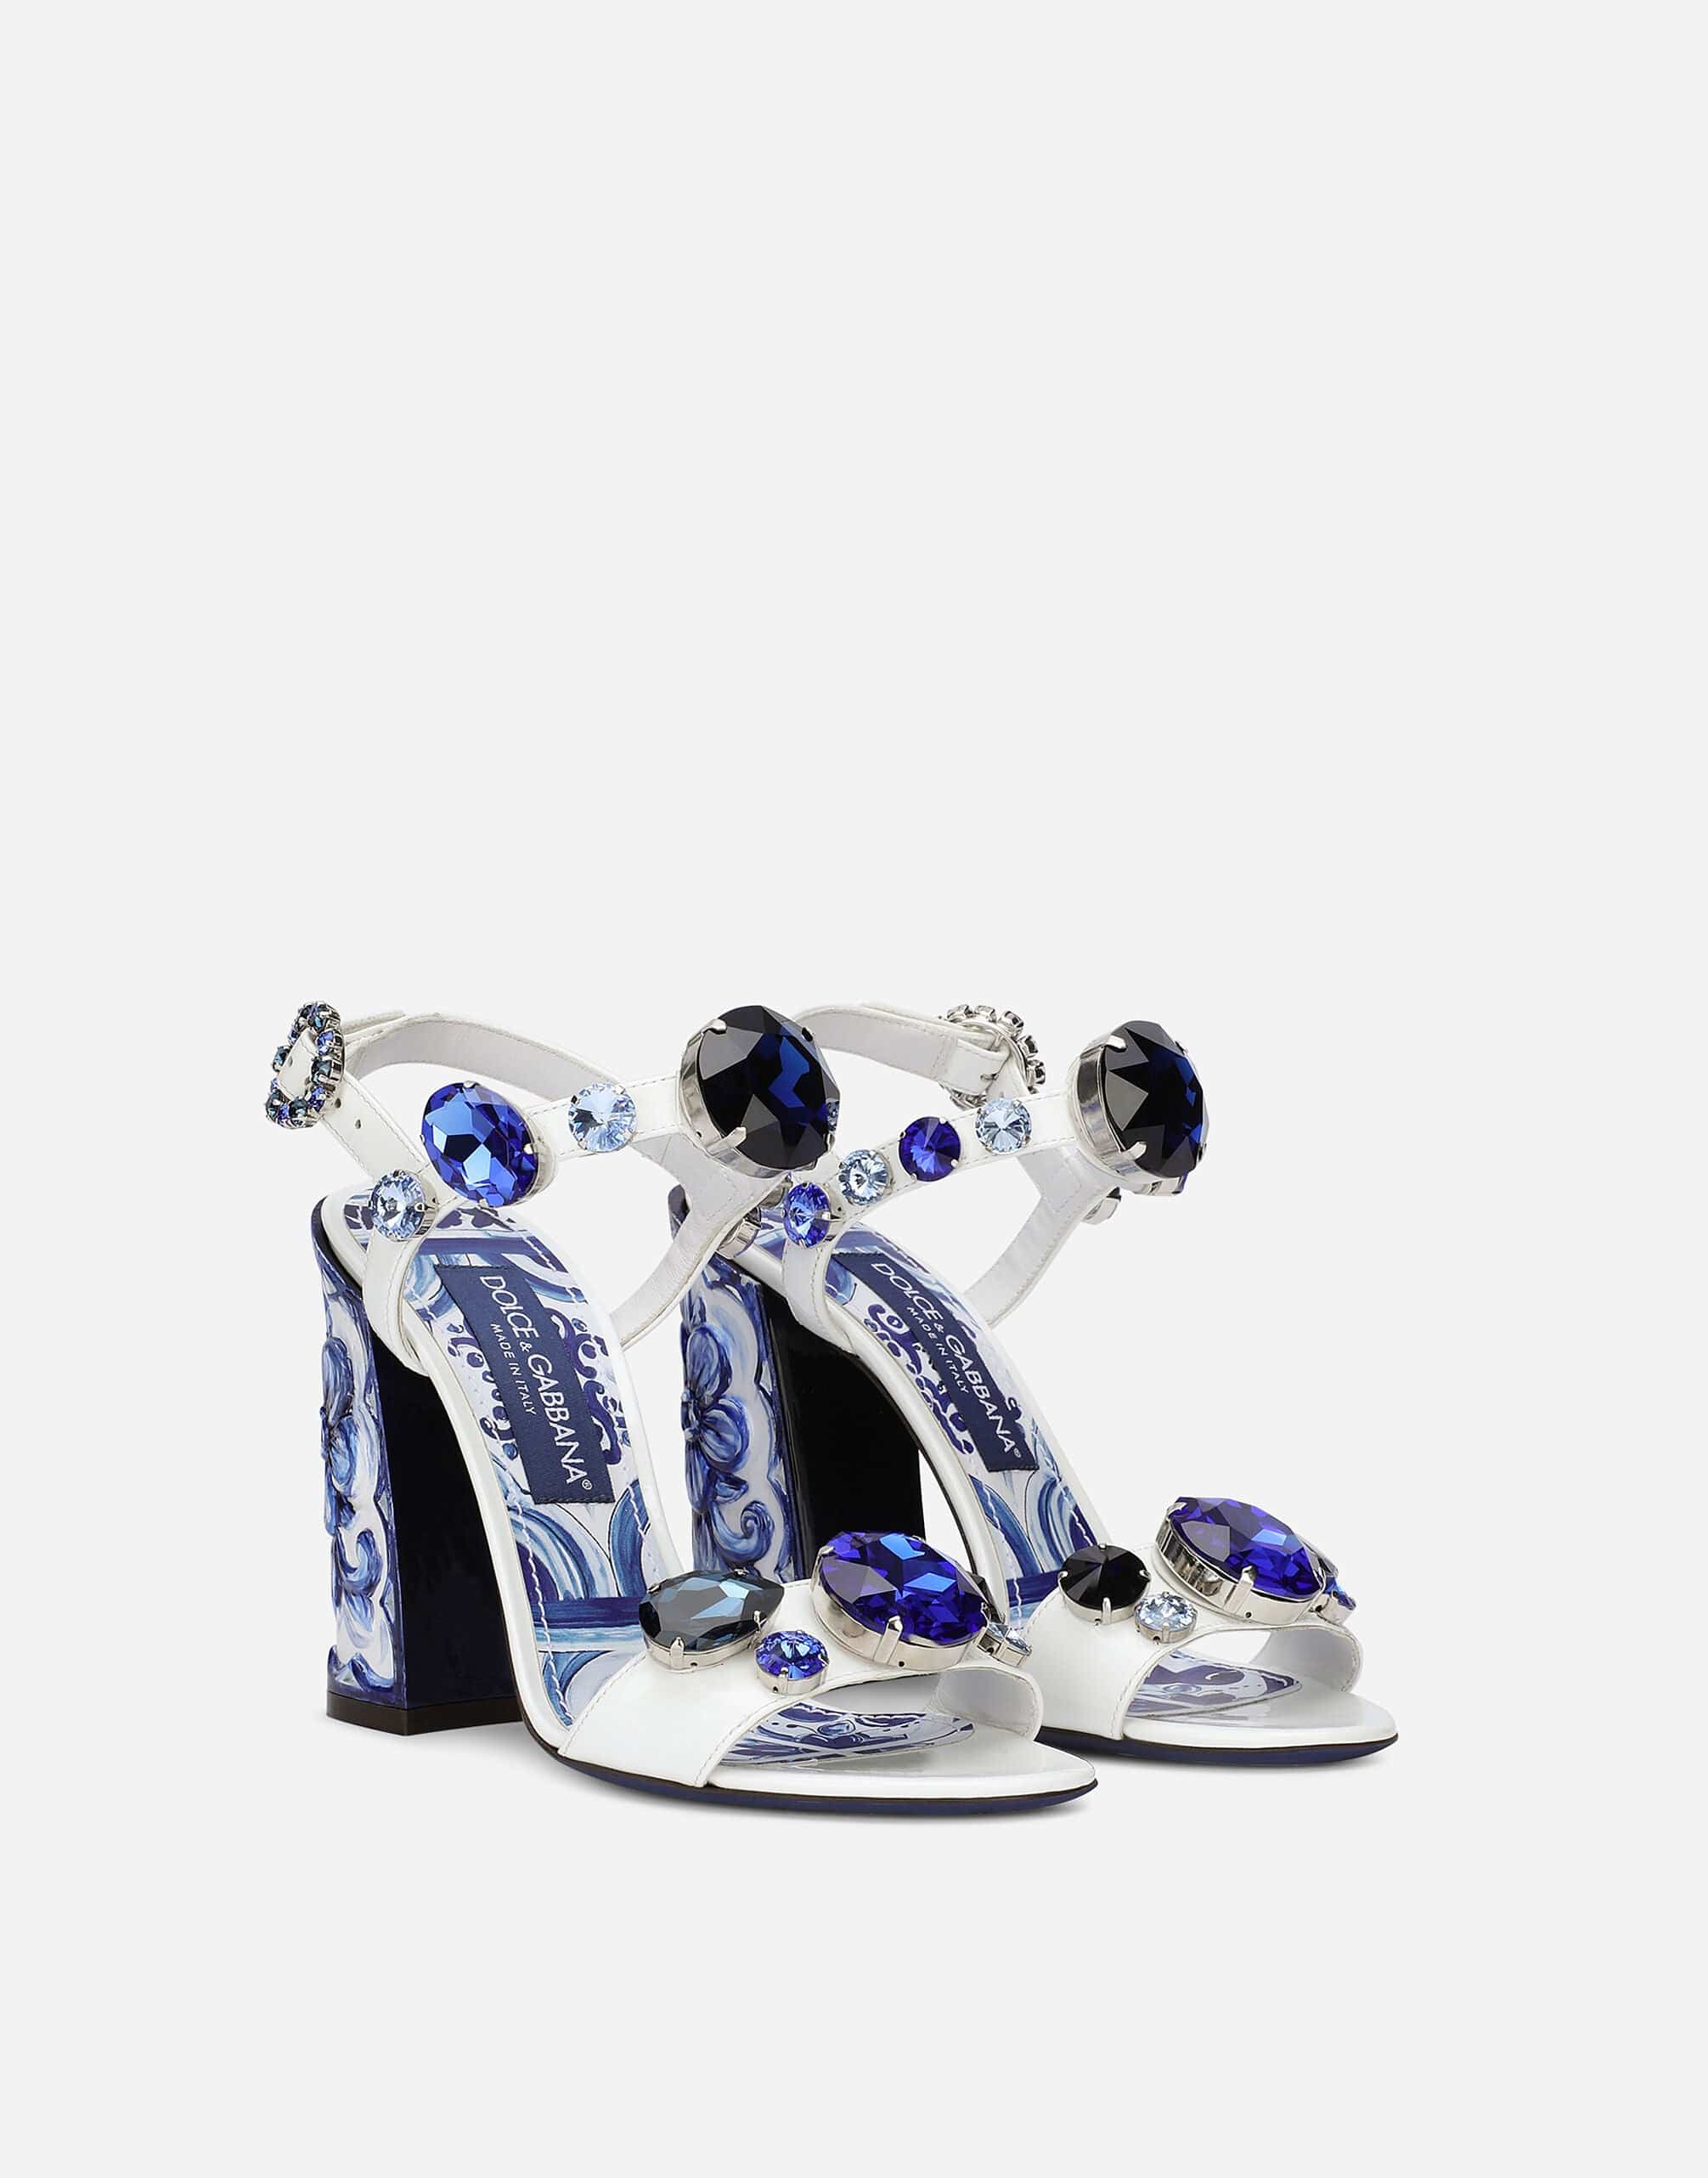 Dolce & Gabbana Keira Sandals With Floral Painted Heels